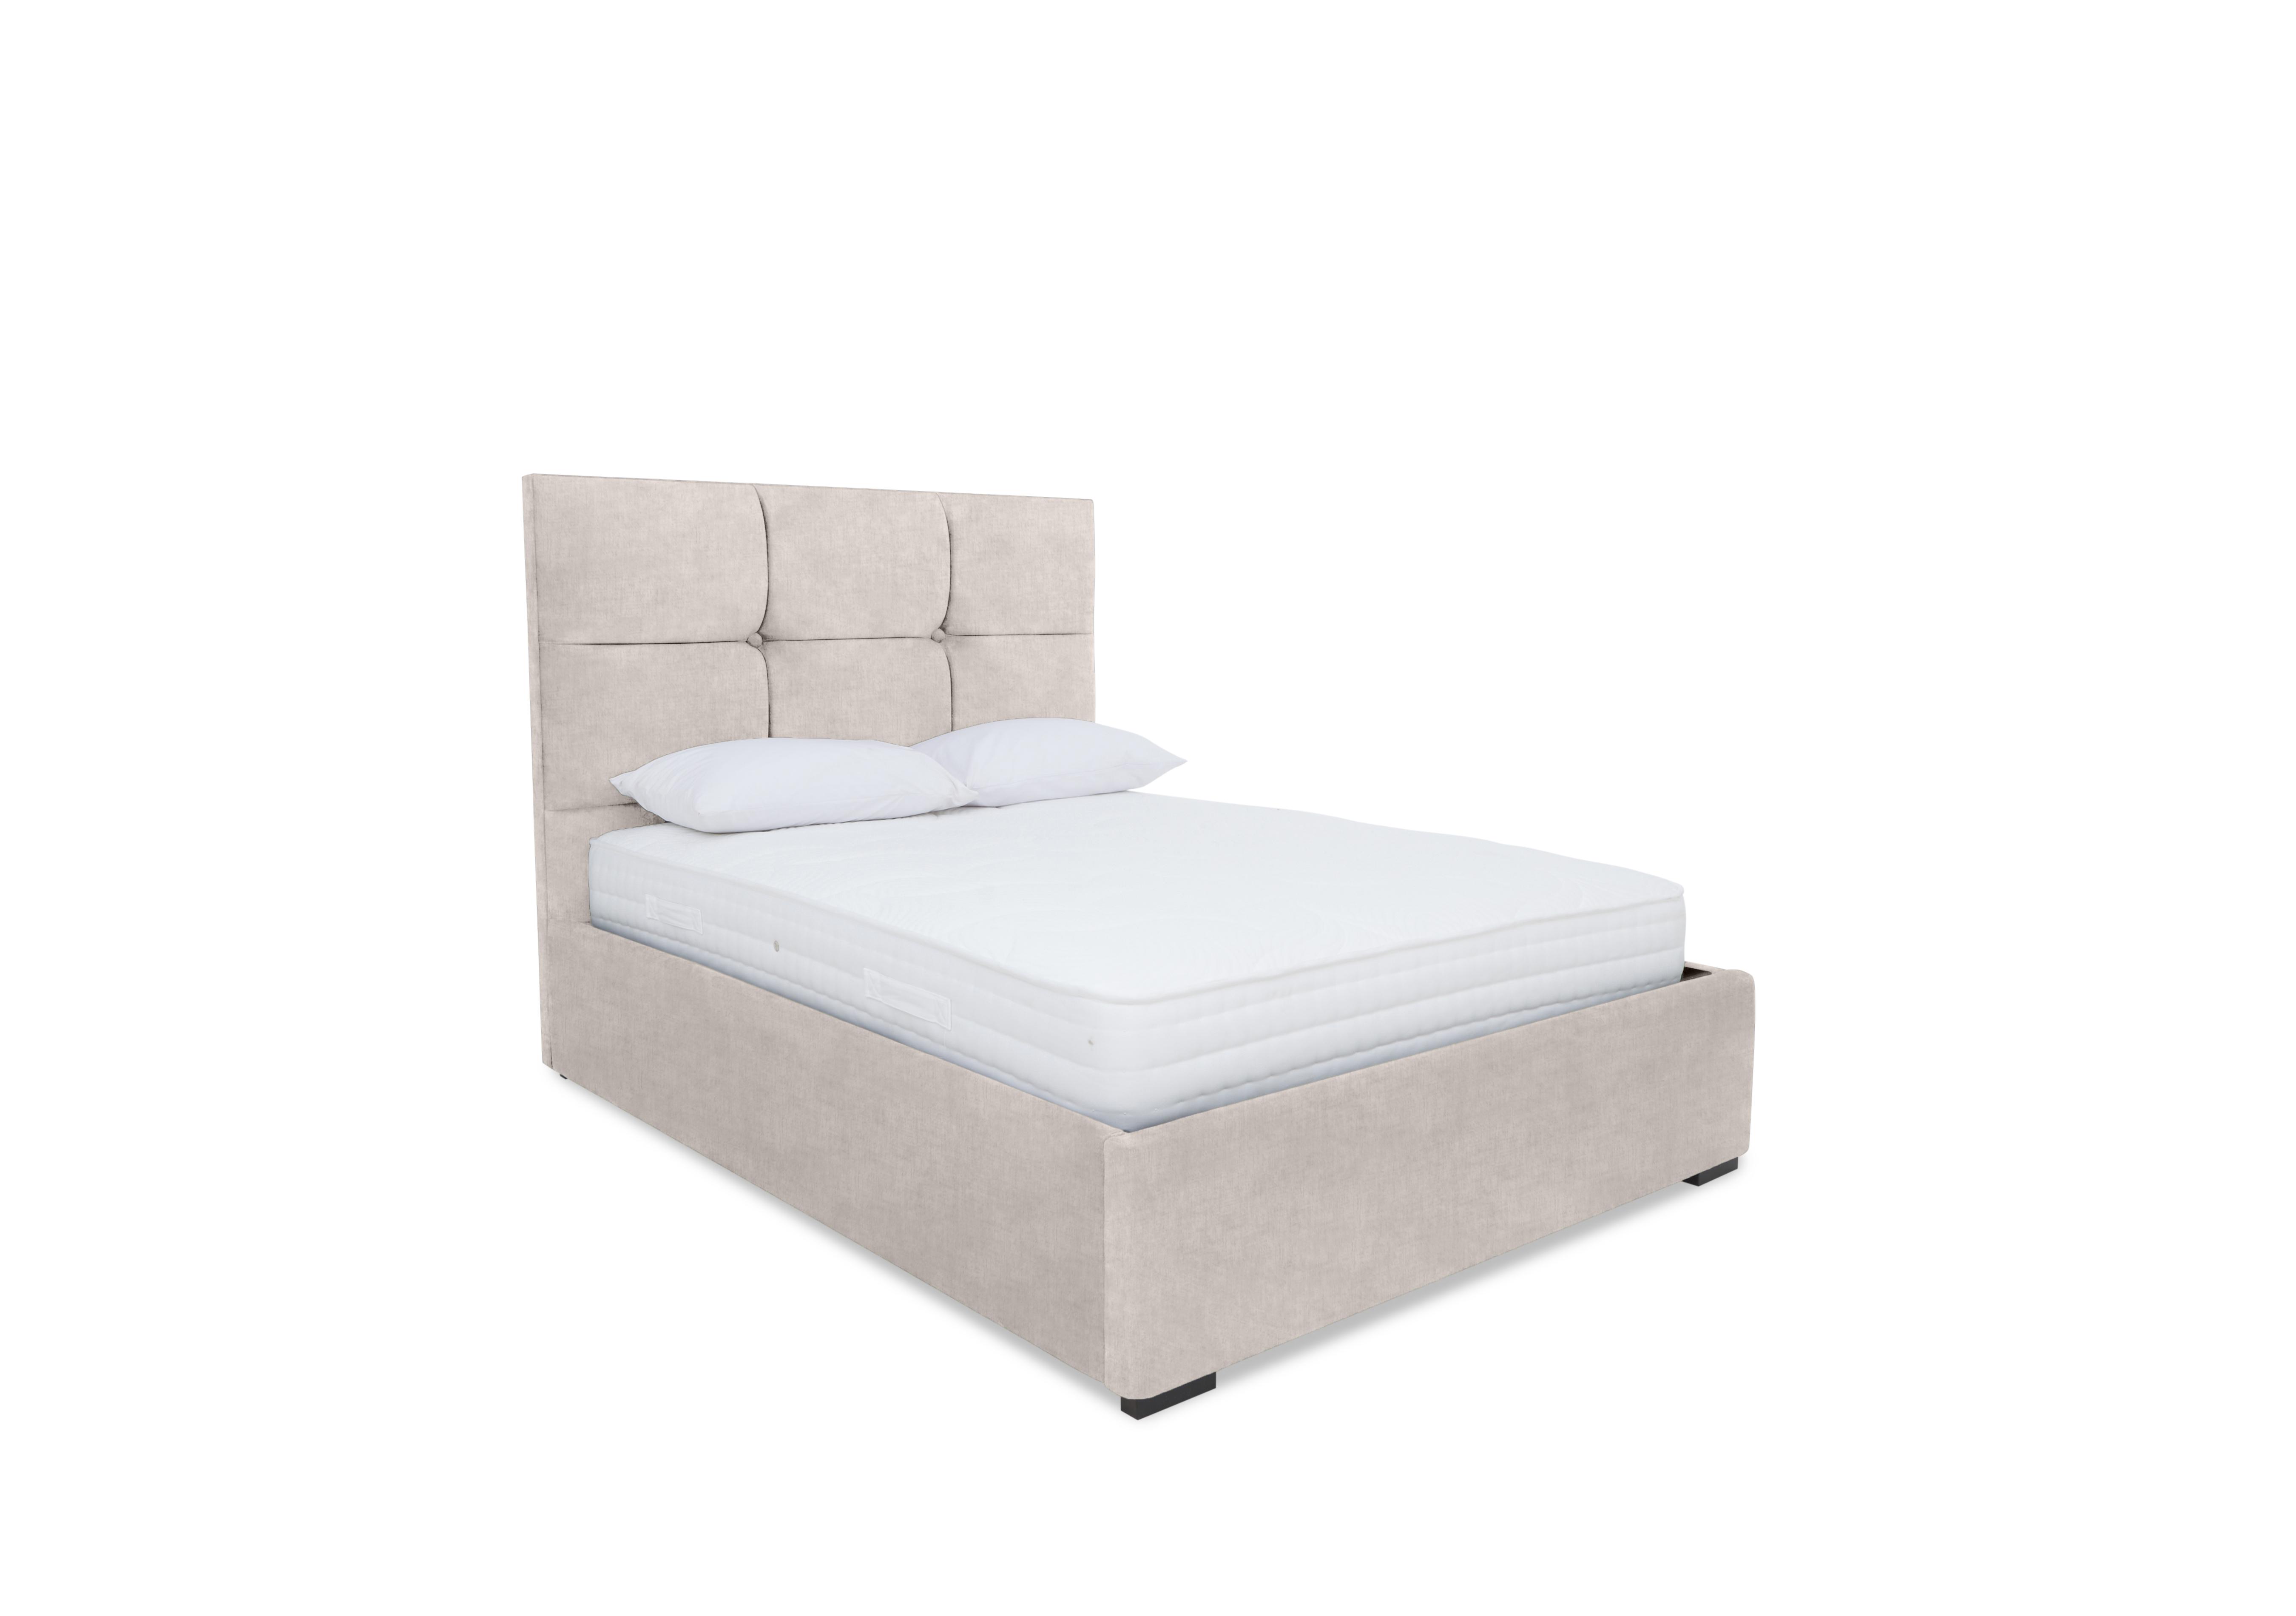 Rubix Electric Ottoman Bed Frame in Lace Ivory on Furniture Village